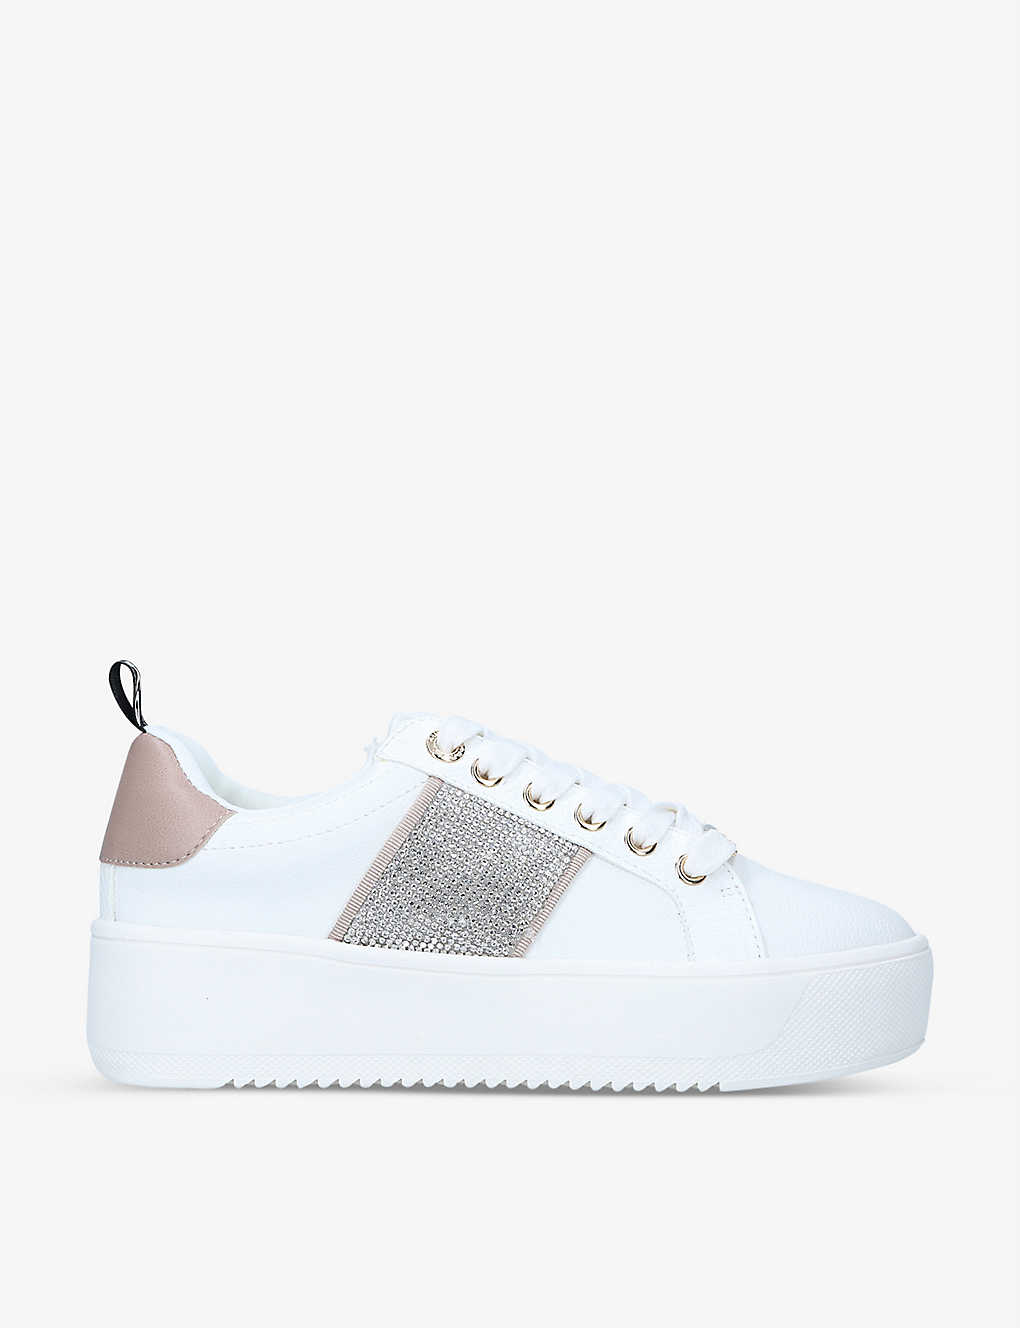 Shop Kg Kurt Geiger Womens White Lighter Embellished Low-top Faux-leather Trainers